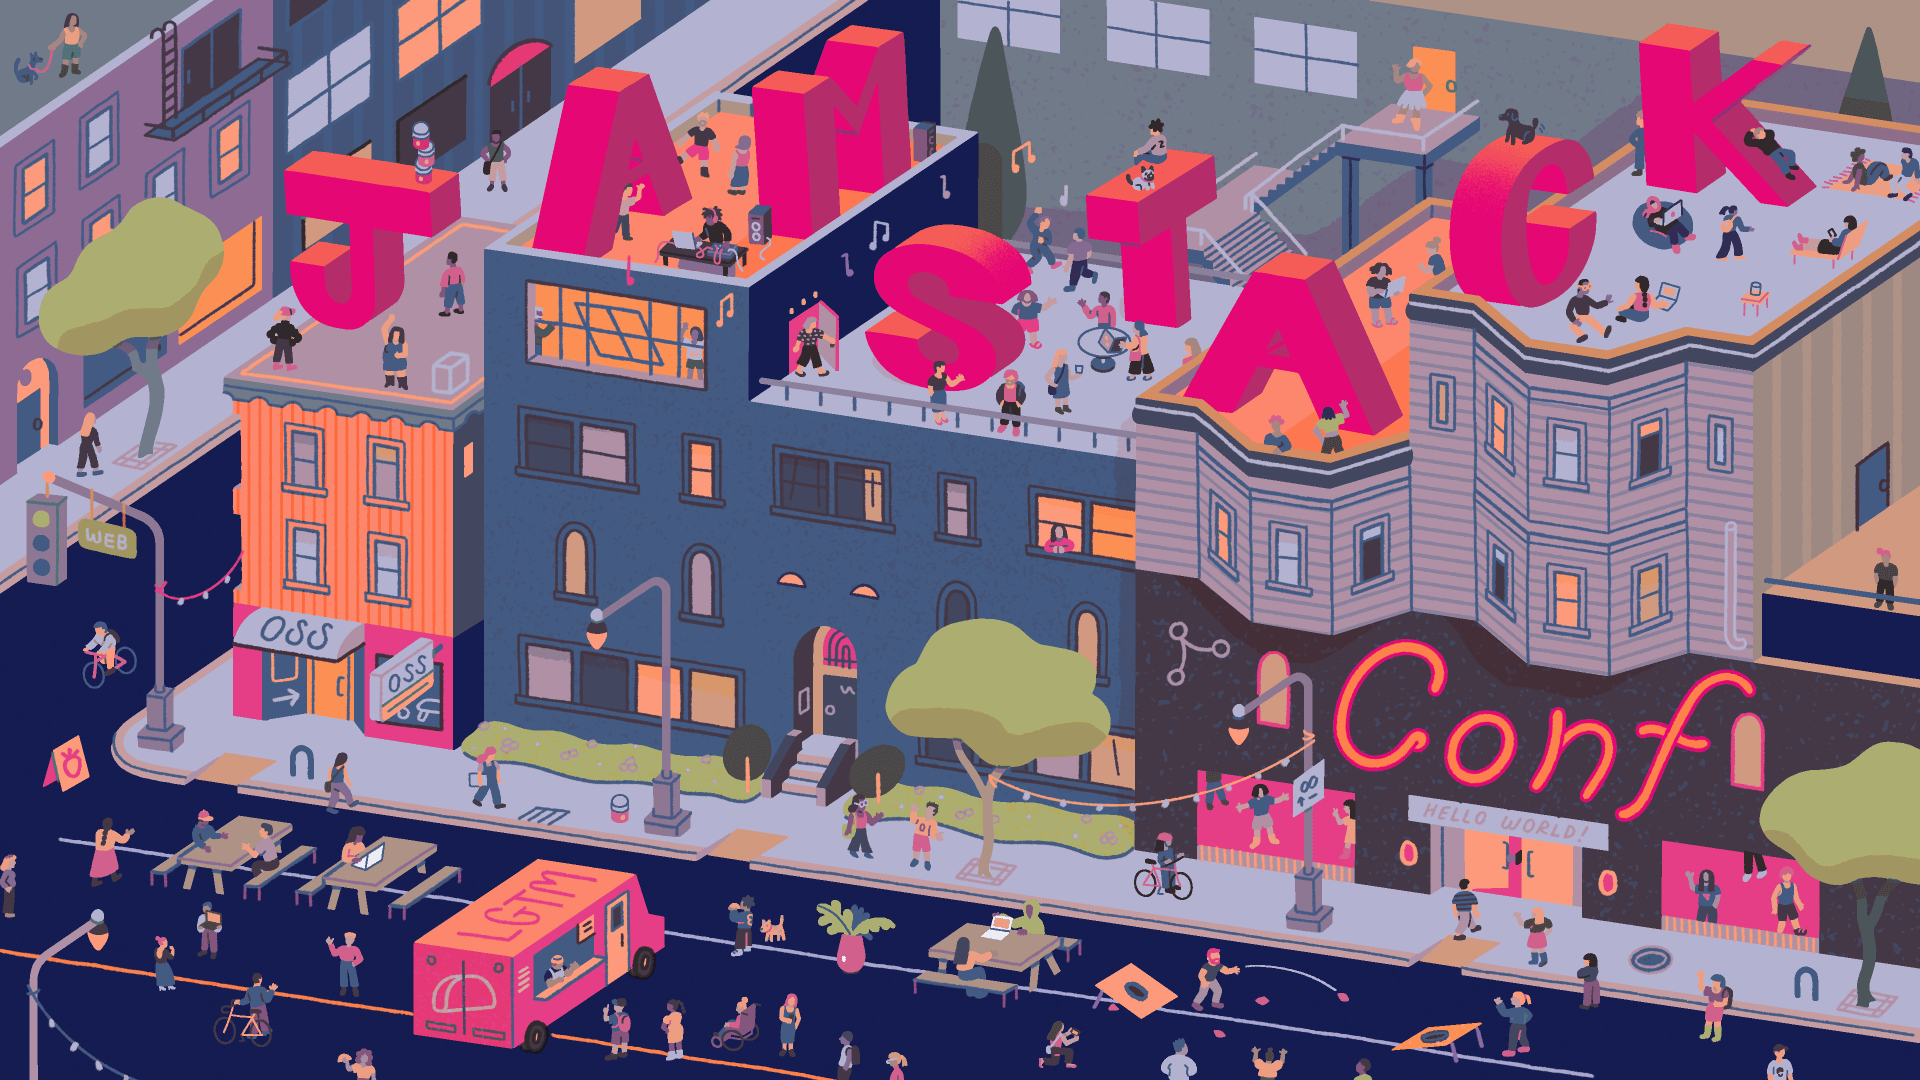 an illustrated scene of a block party with people hanging out on the street and on rooftops